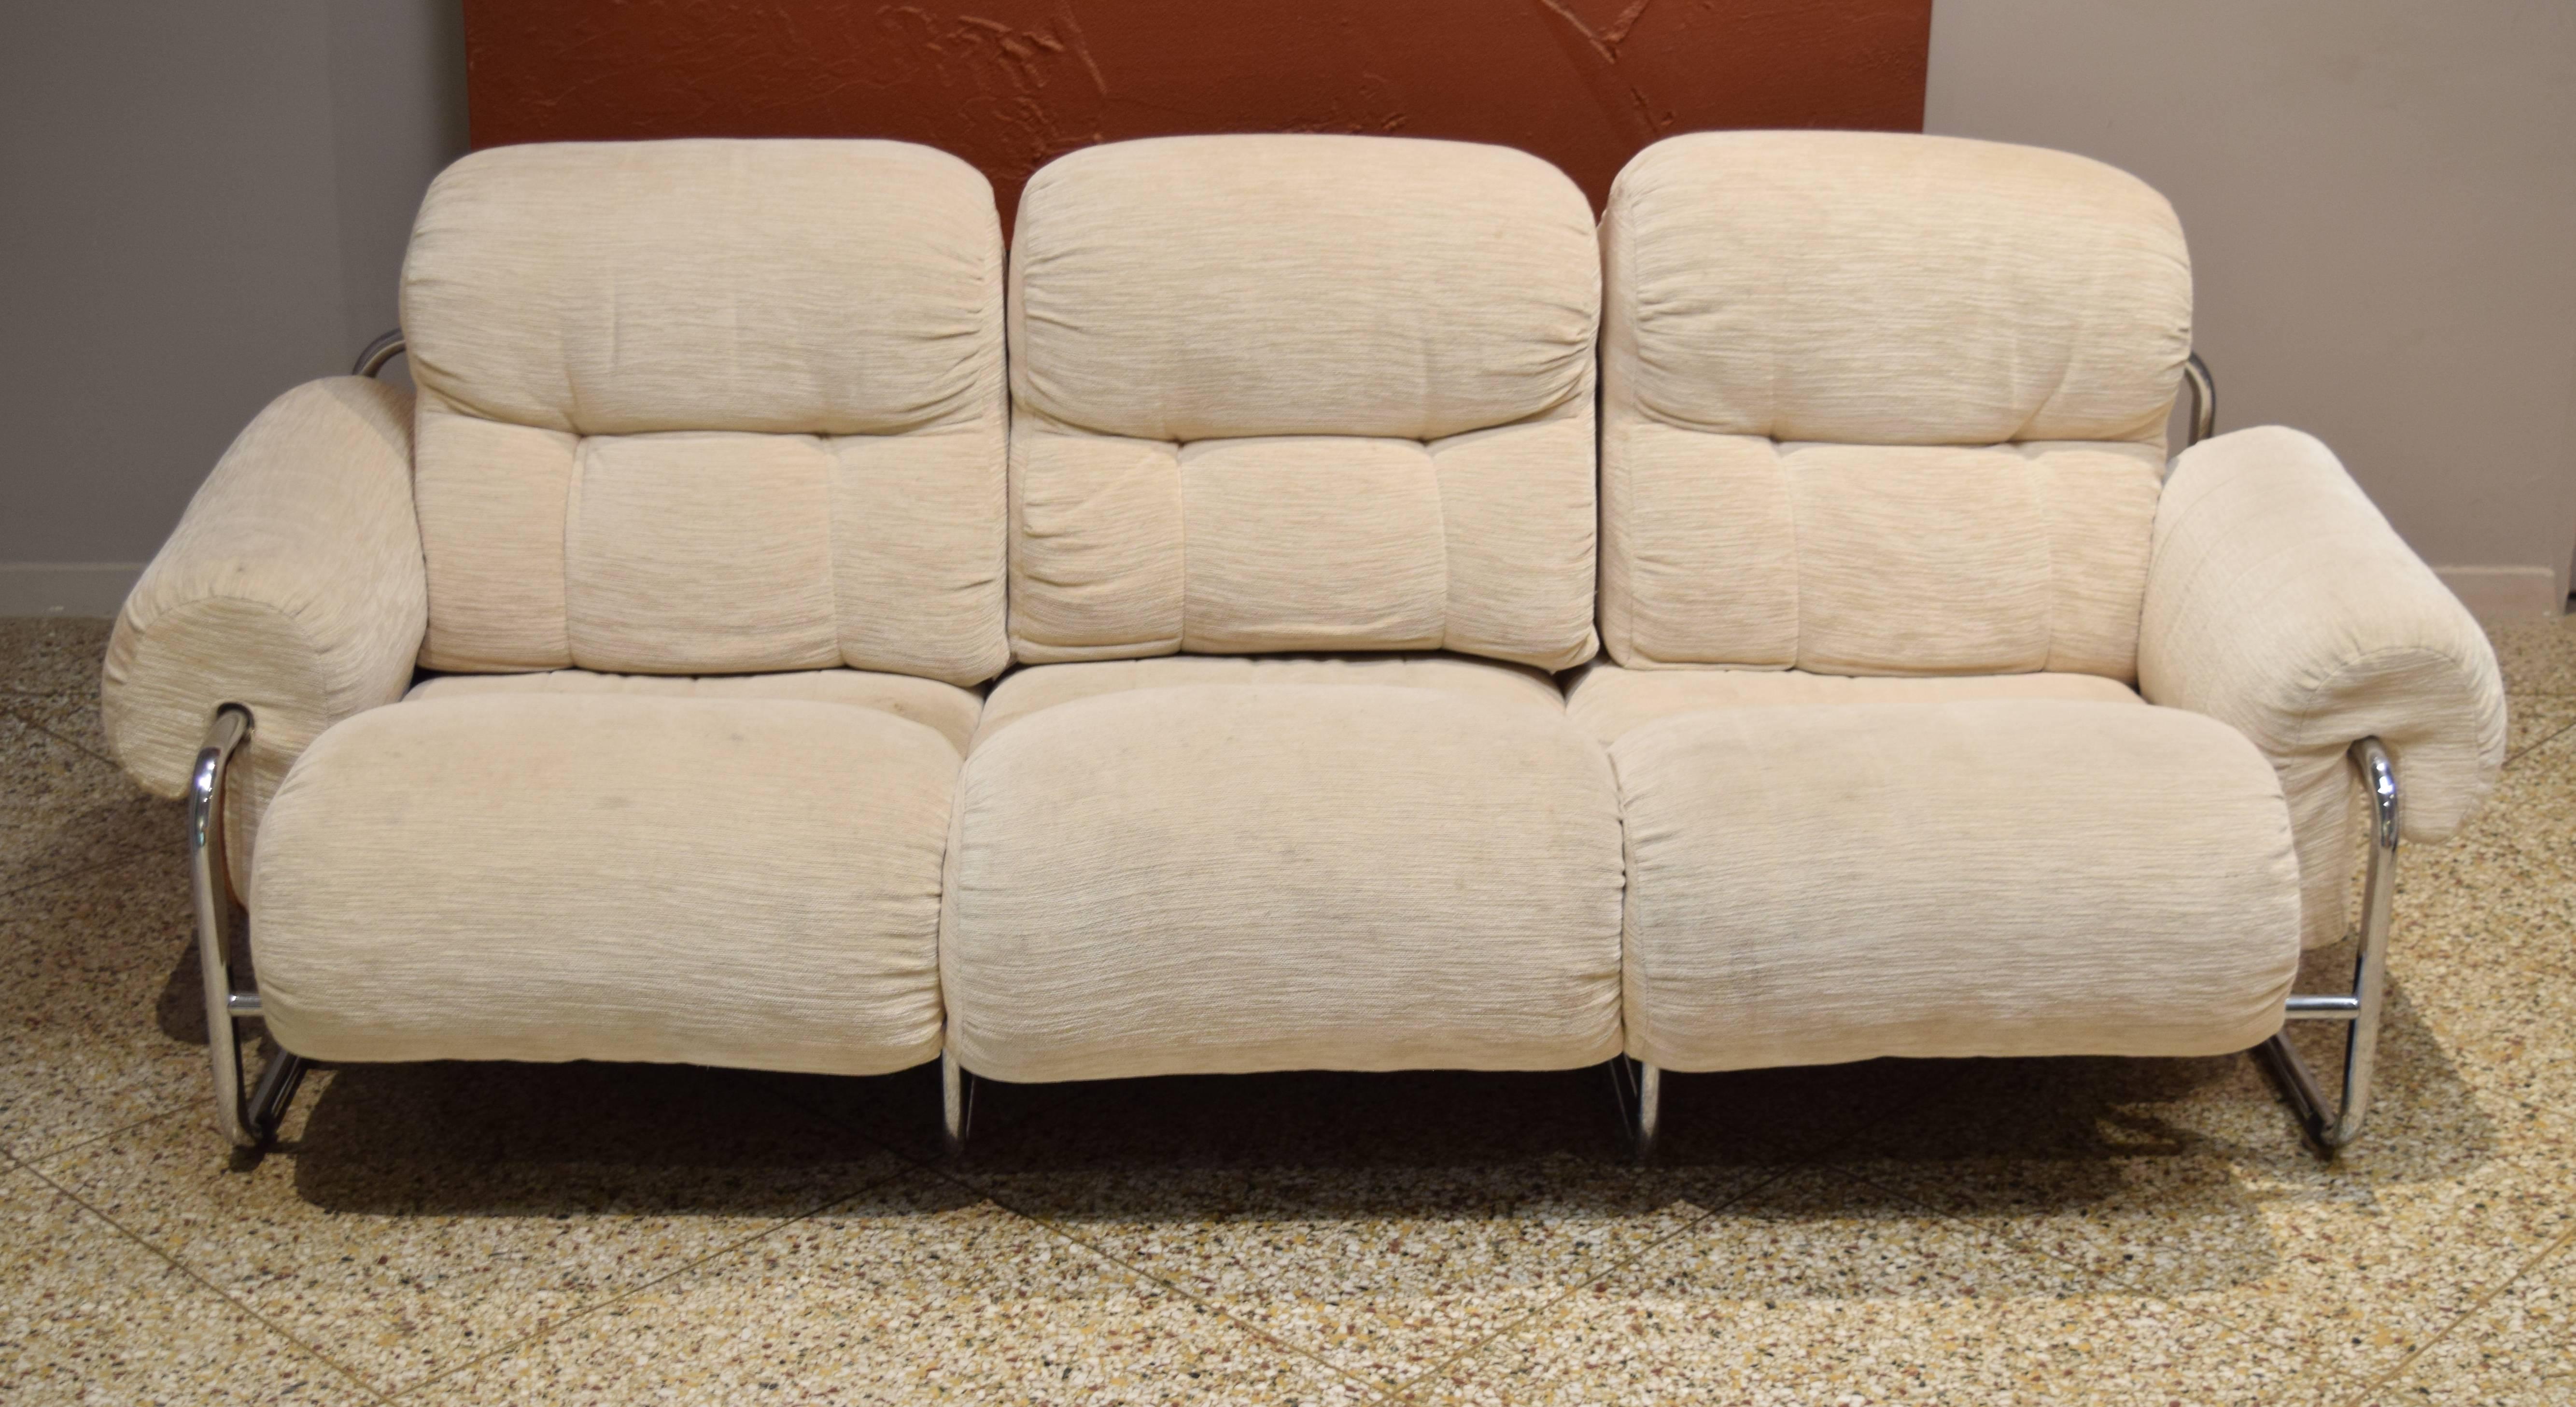 Store closing-- last day is 7/31. Offers welcome! Swanky three-seat sofa from the Tucroma series by Guido Faleschini for the Pace collection. 
